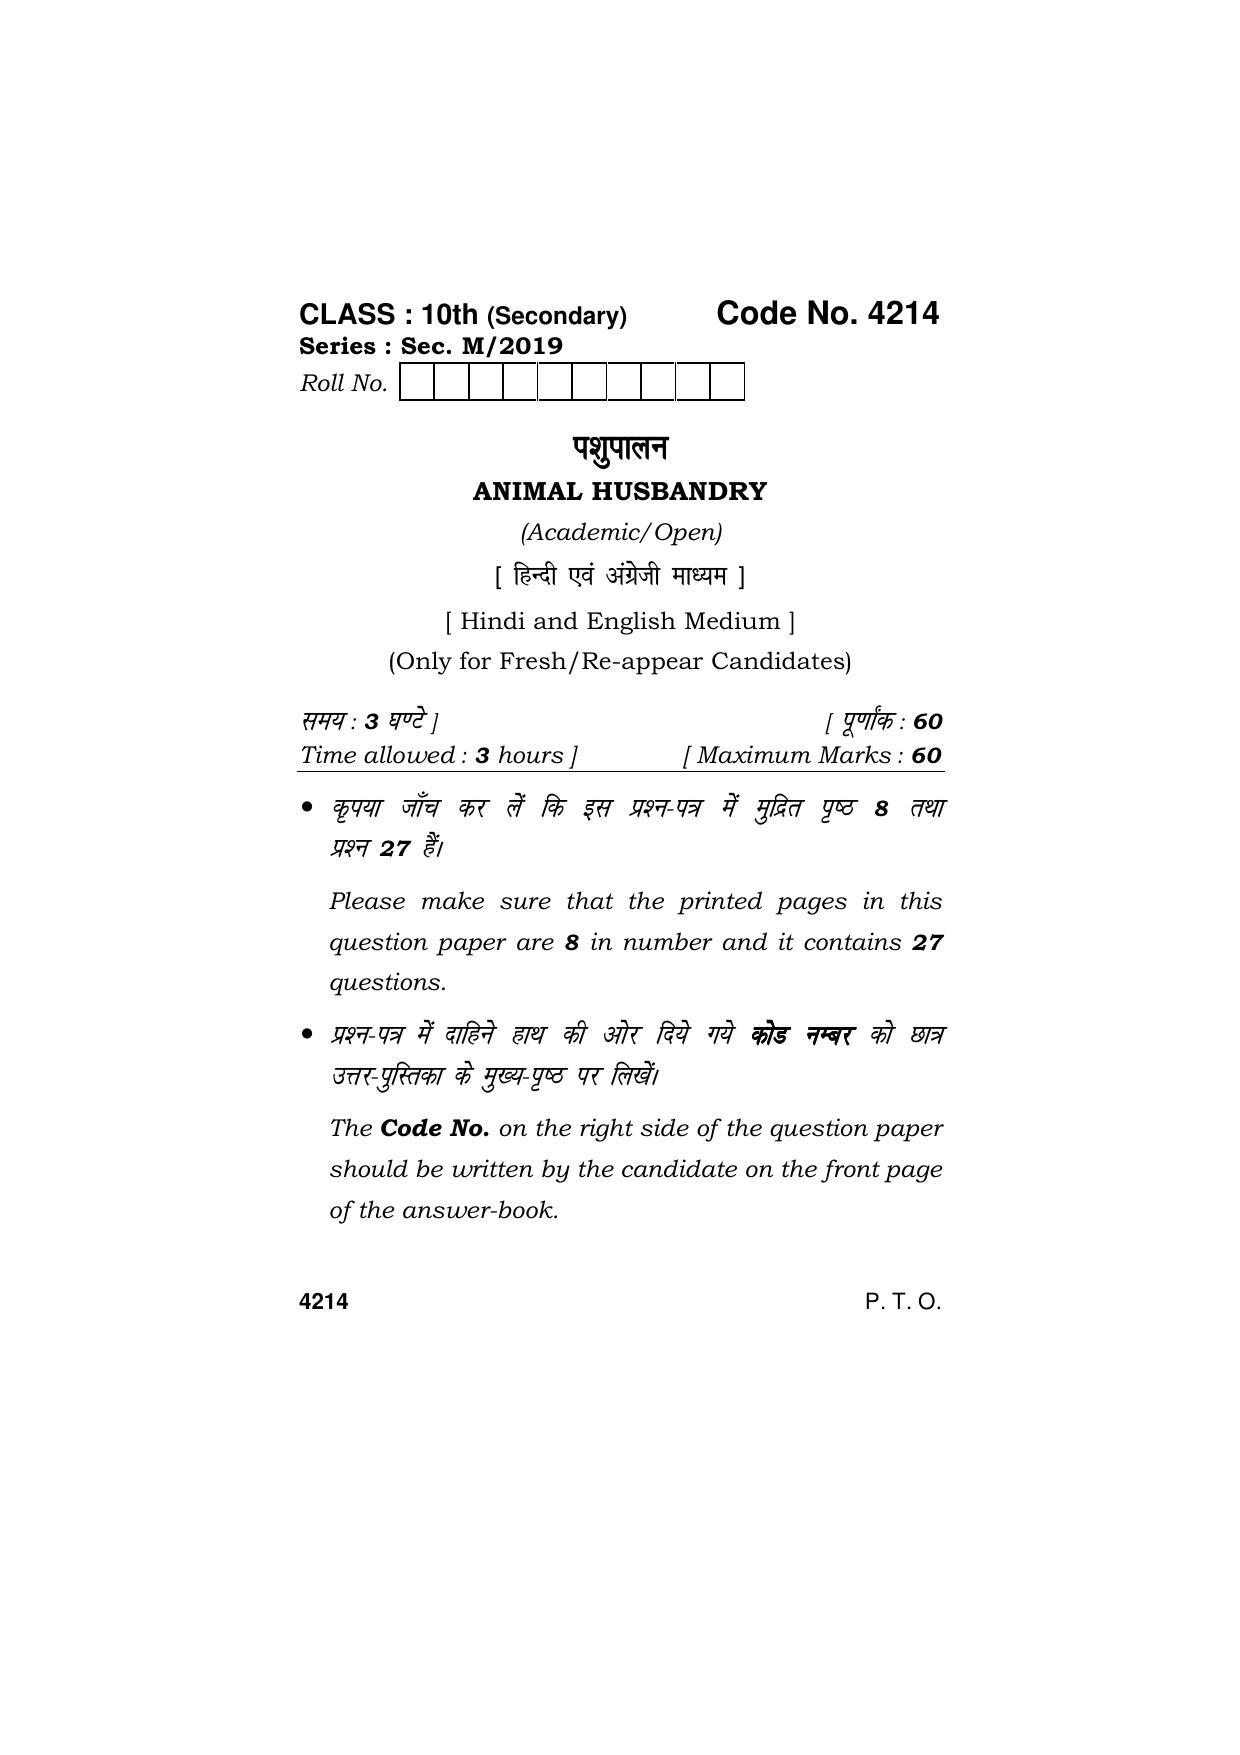 Haryana Board HBSE Class 10 Animal Husbandry 2019 Question Paper - Page 1